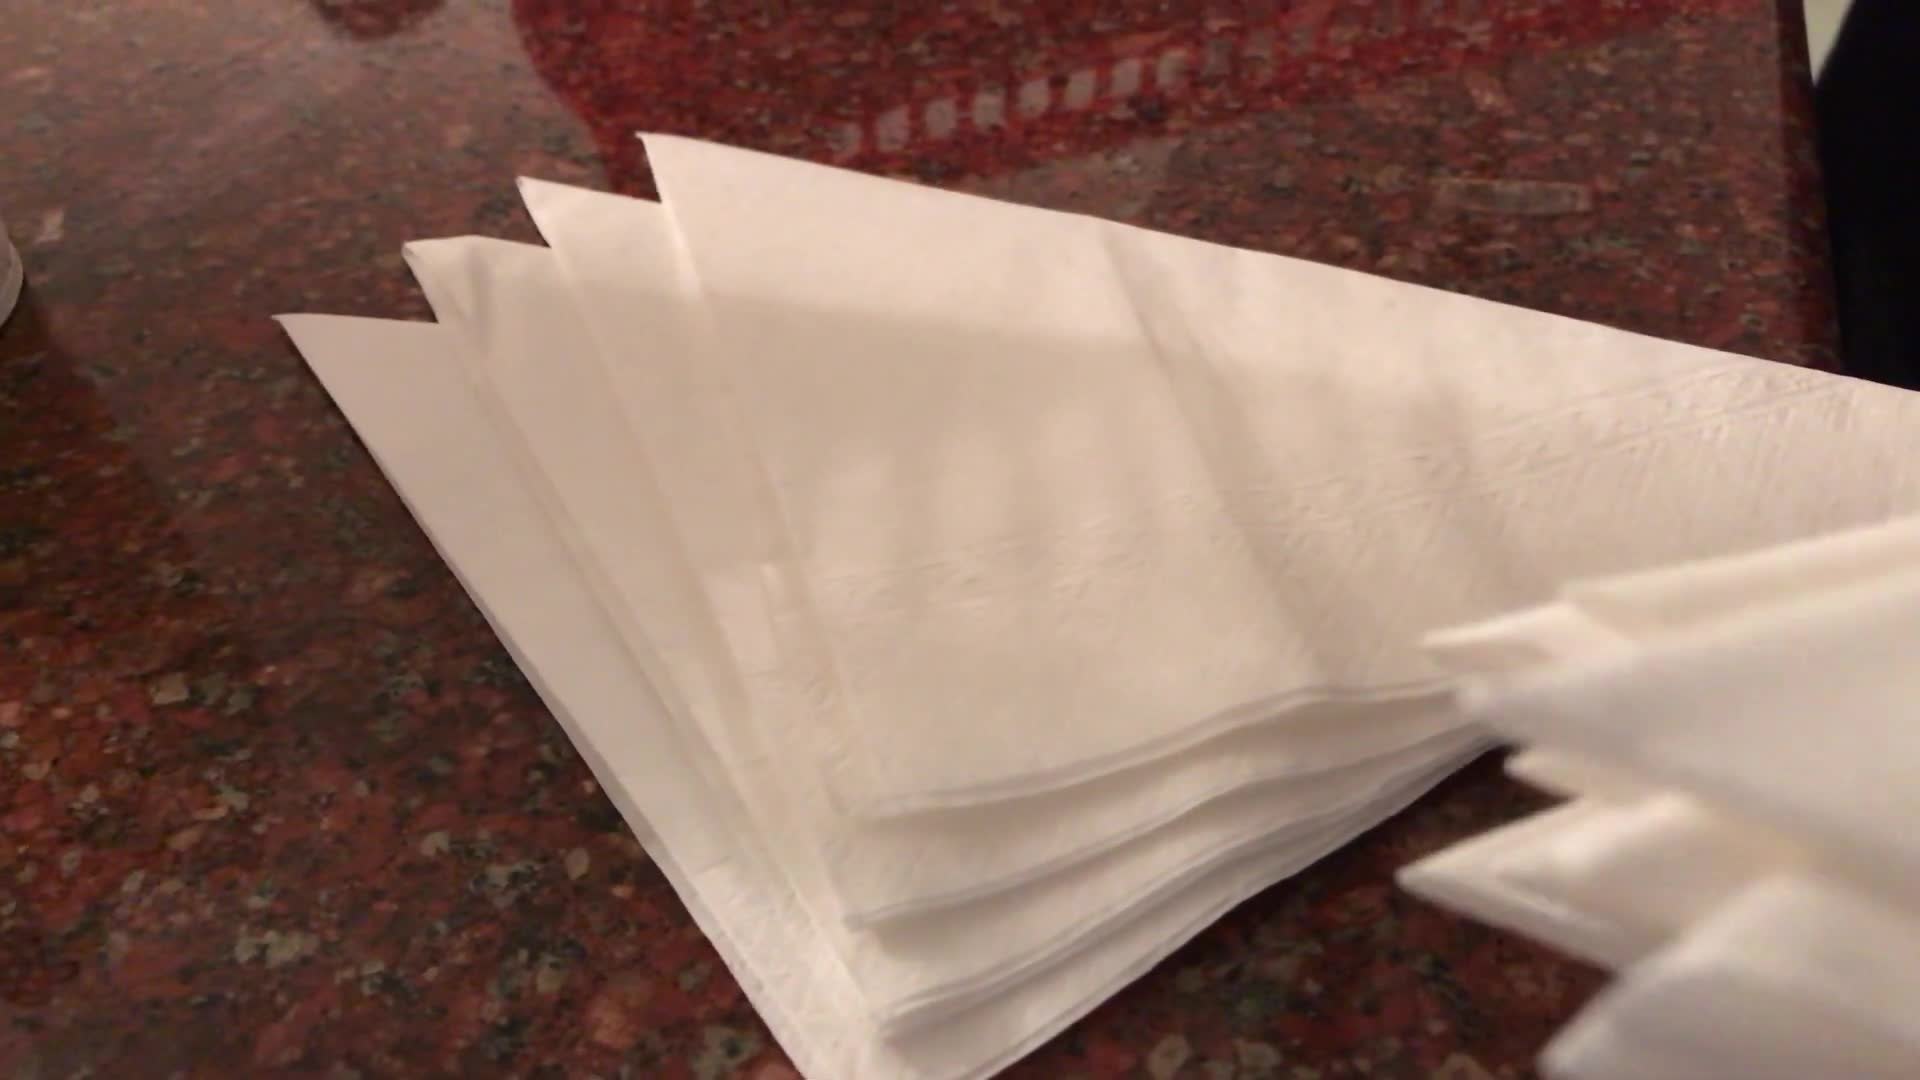 How To Fold A Paper Napkin